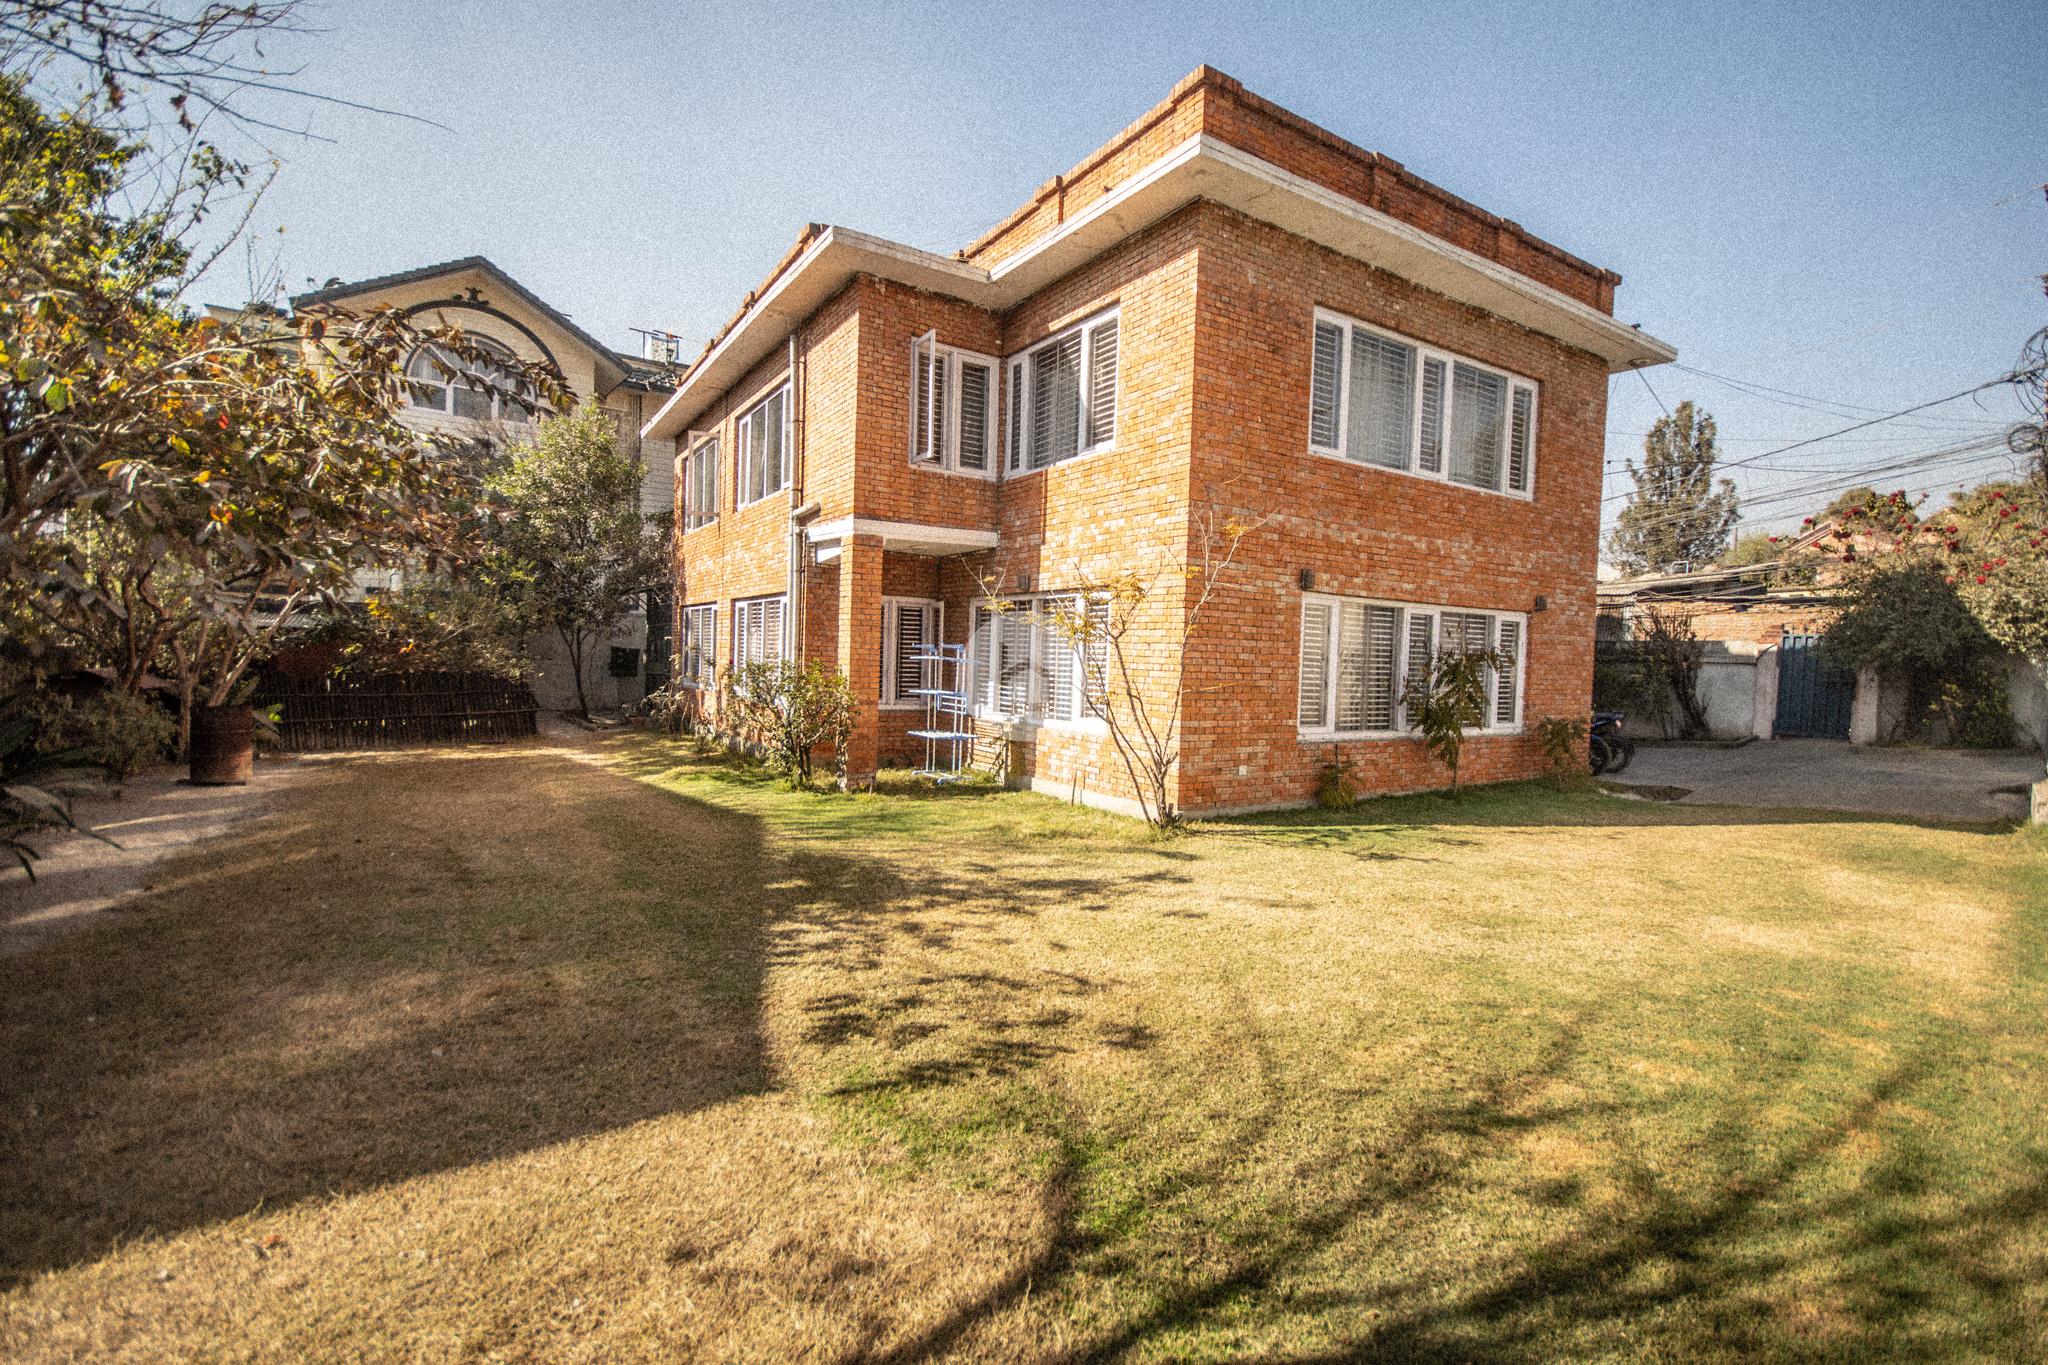 Attractive House is for Sale : House for Sale in Baluwatar, Kathmandu Thumbnail